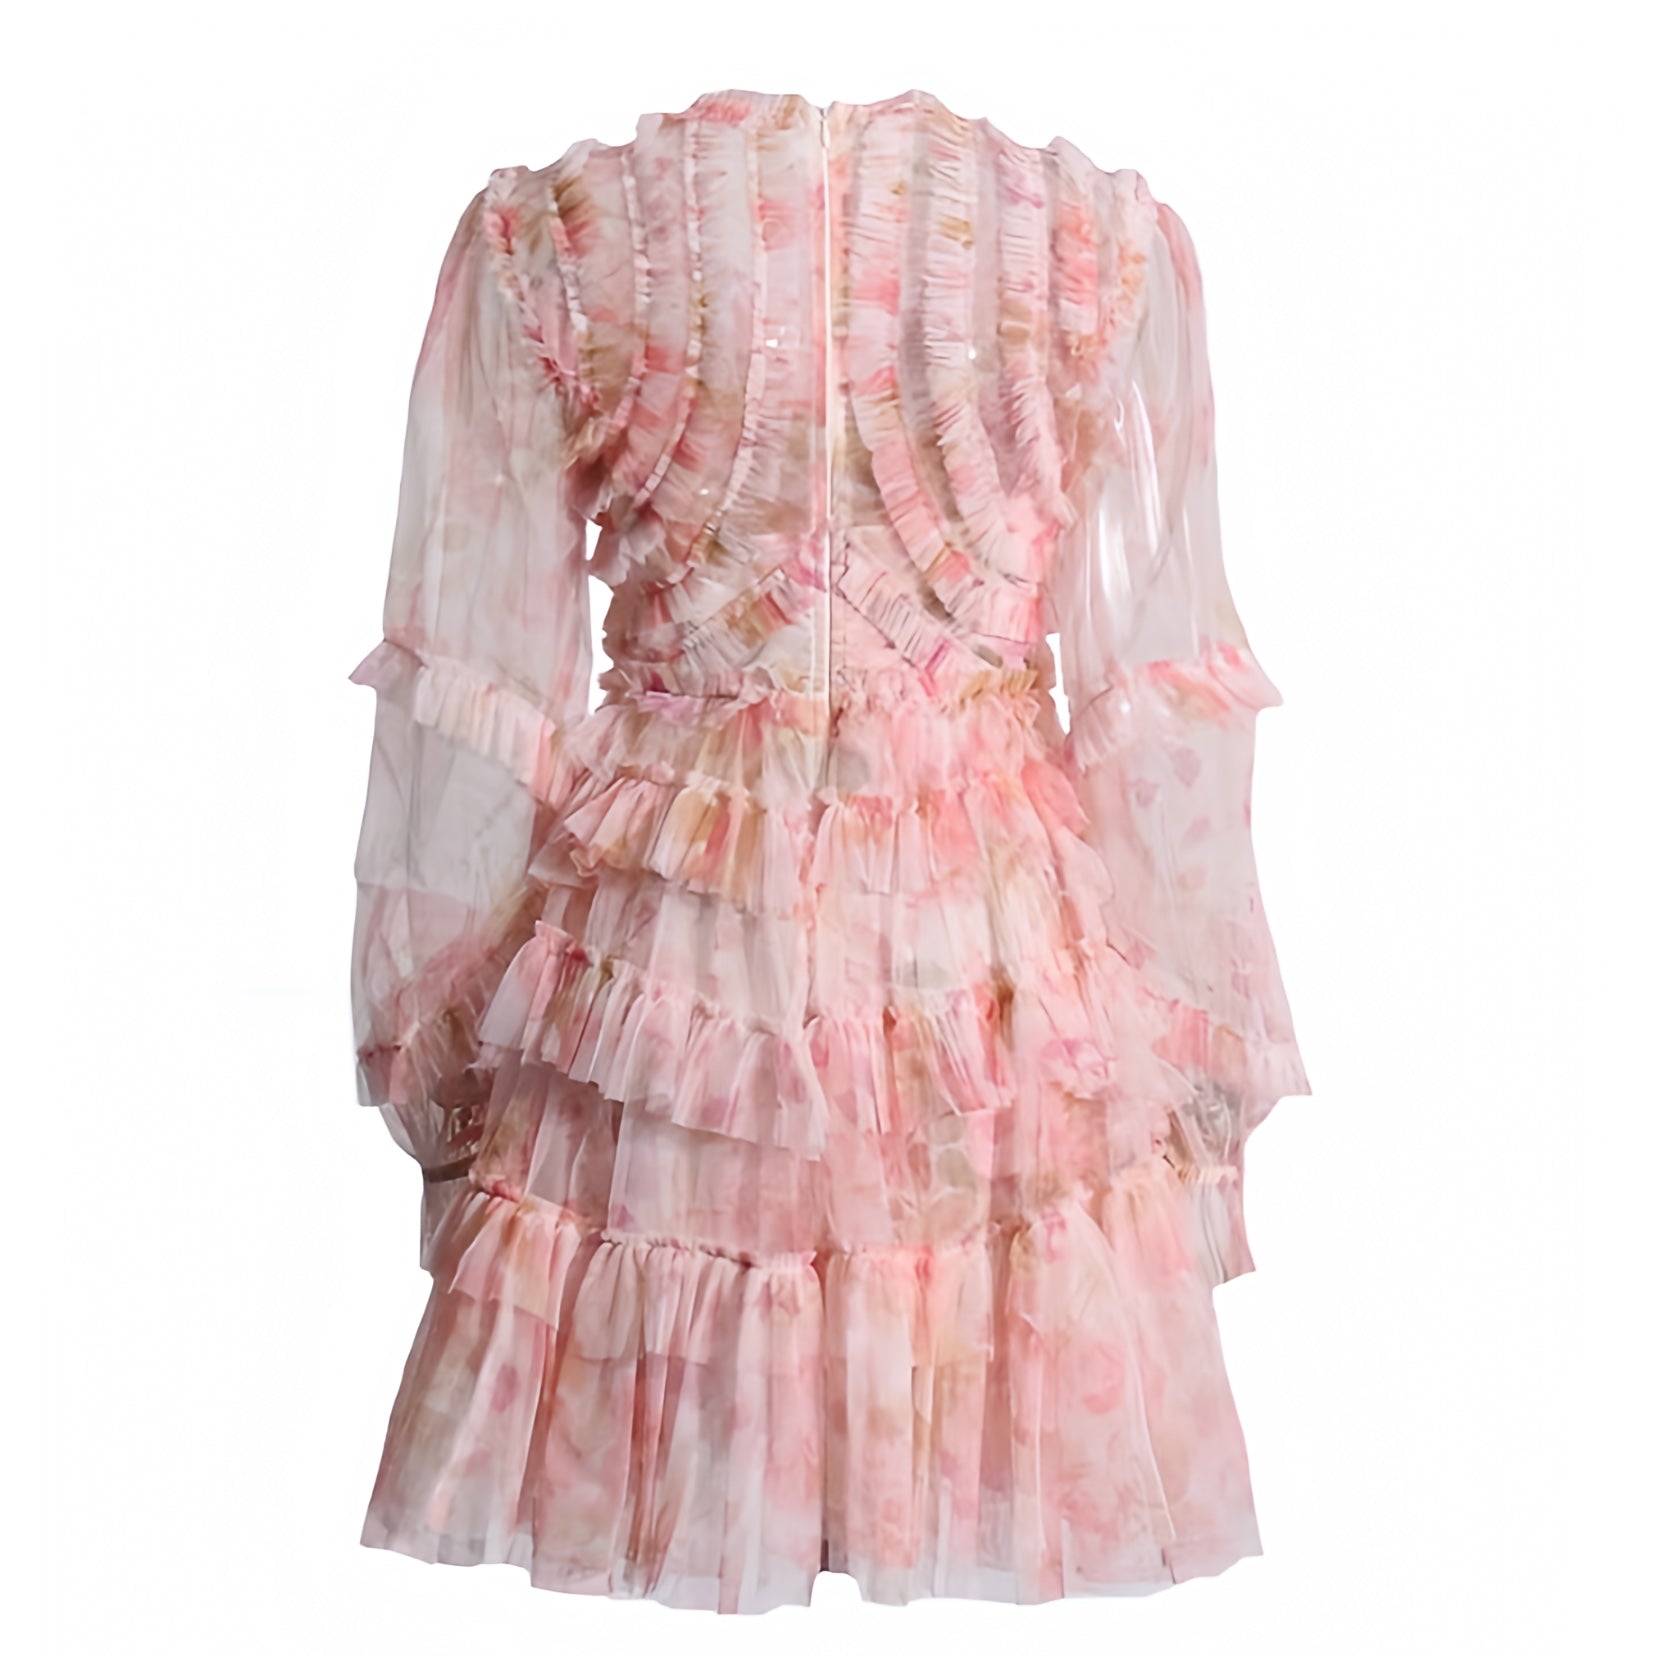 light-pink-multi-color-floral-patterned-layered-ruffle-trim-feathered-slim-fit-bodycon-fitted-bodice-drop-waist-v-neck-mesh-translucent-long-sleeve-mini-short-dress-ball-gown-couture-women-ladies-chic-trendy-spring-2024-summer-elegant-semi-formal-casual-classy-feminine-gala-prom-debutante-wedding-guest-party-preppy-style-beach-vacation-sundress-altard-state-zimmerman-revolve-loveshackfancy-fillyboo-reformation-dupe